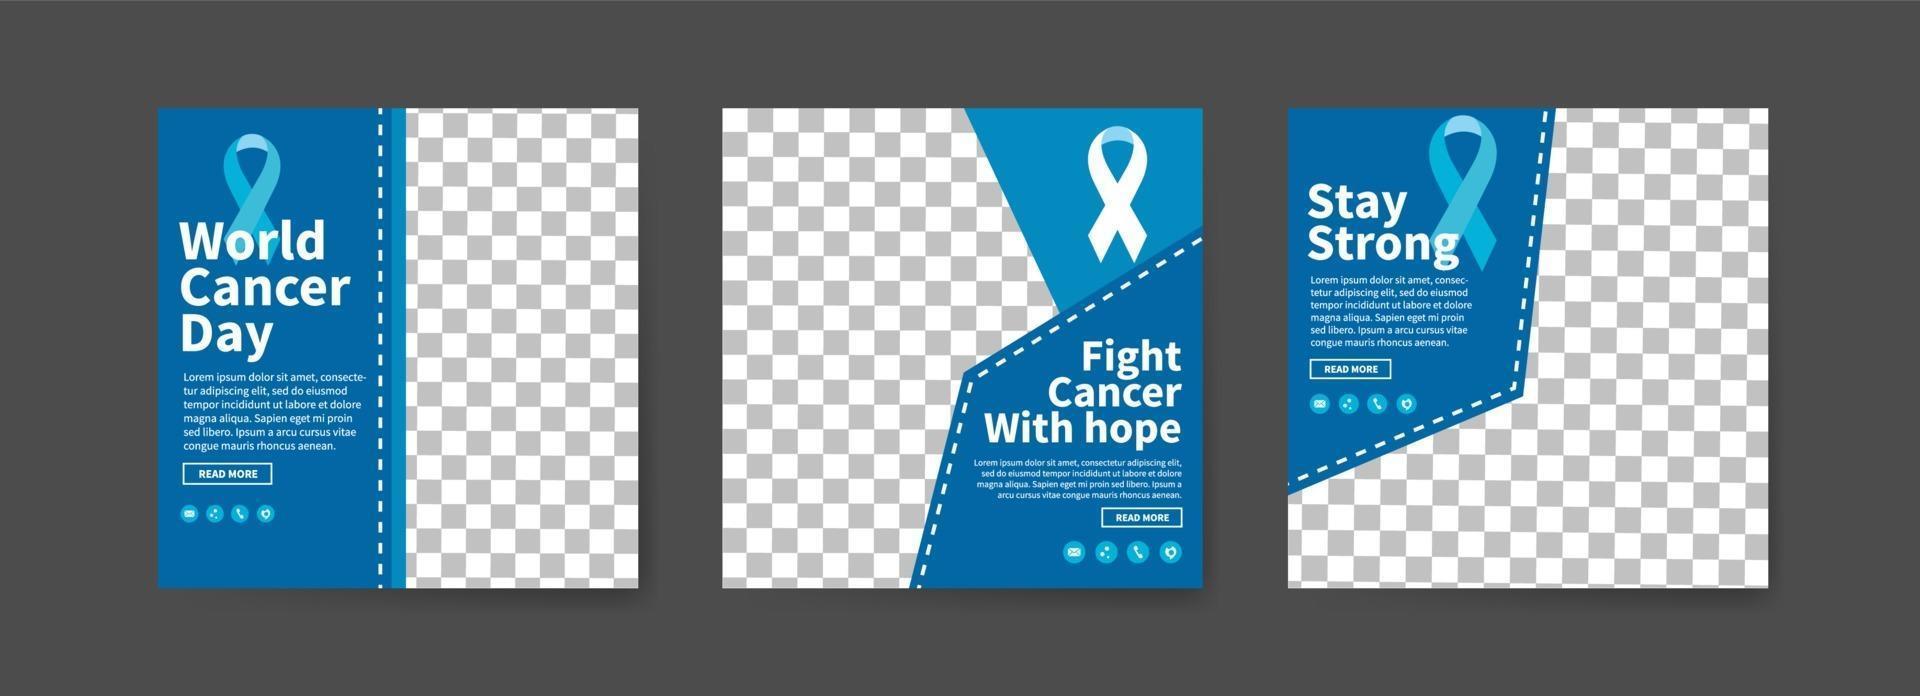 Social media post templates for world cancer day. vector